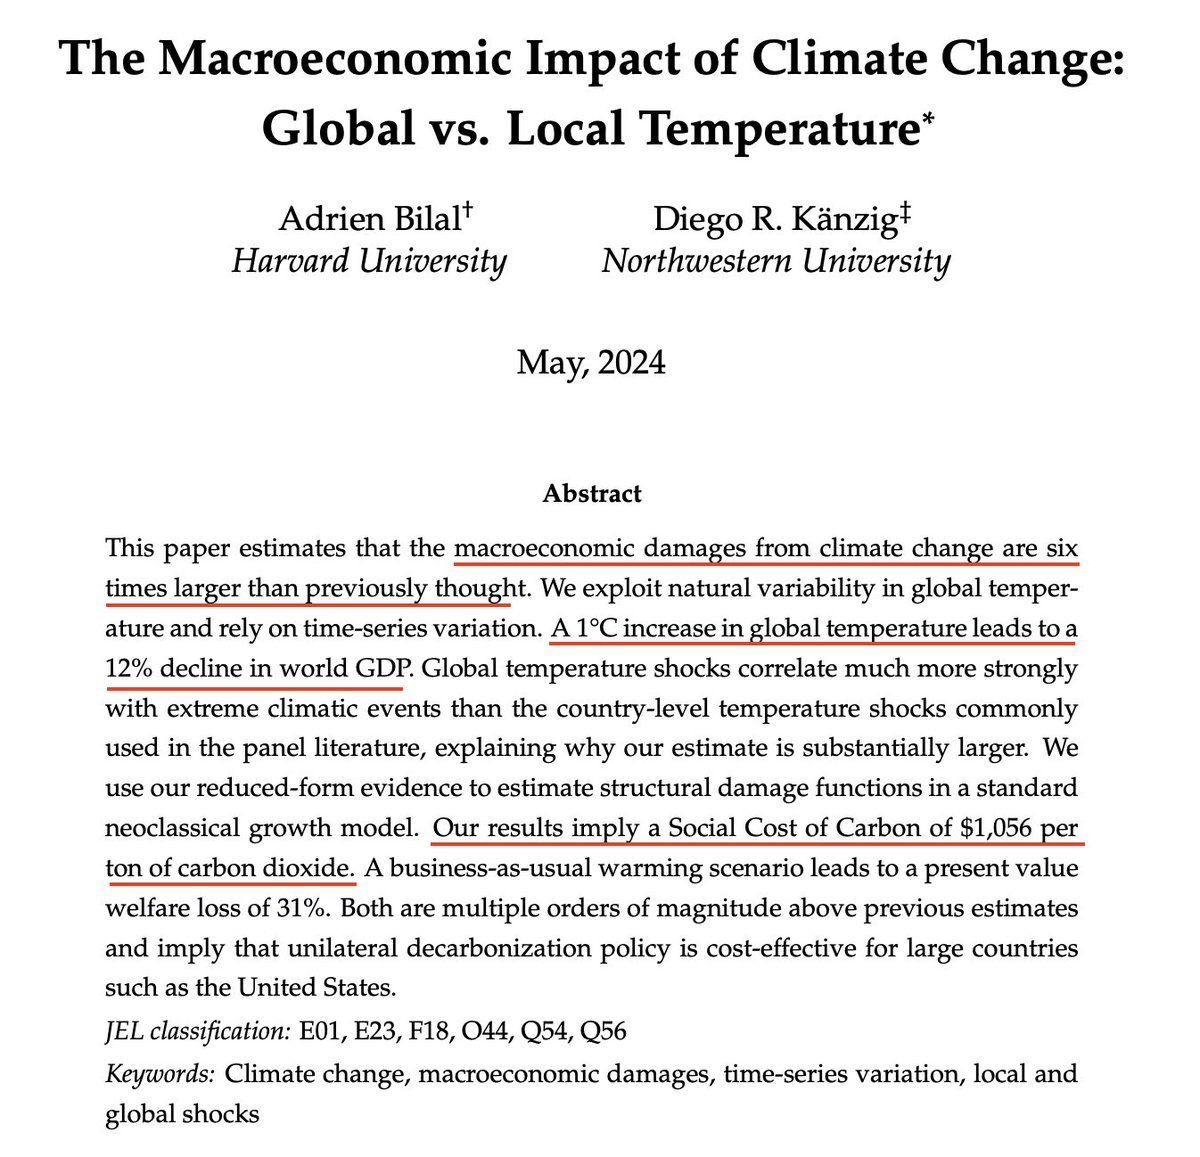 New study: each '1°C increase in global temperature leads to a 12% decline in world GDP.' Society loses more than $1,000 for every ton of CO2 emitted. Climate inaction is bankrupting us. No time to wait. #ActOnClimate